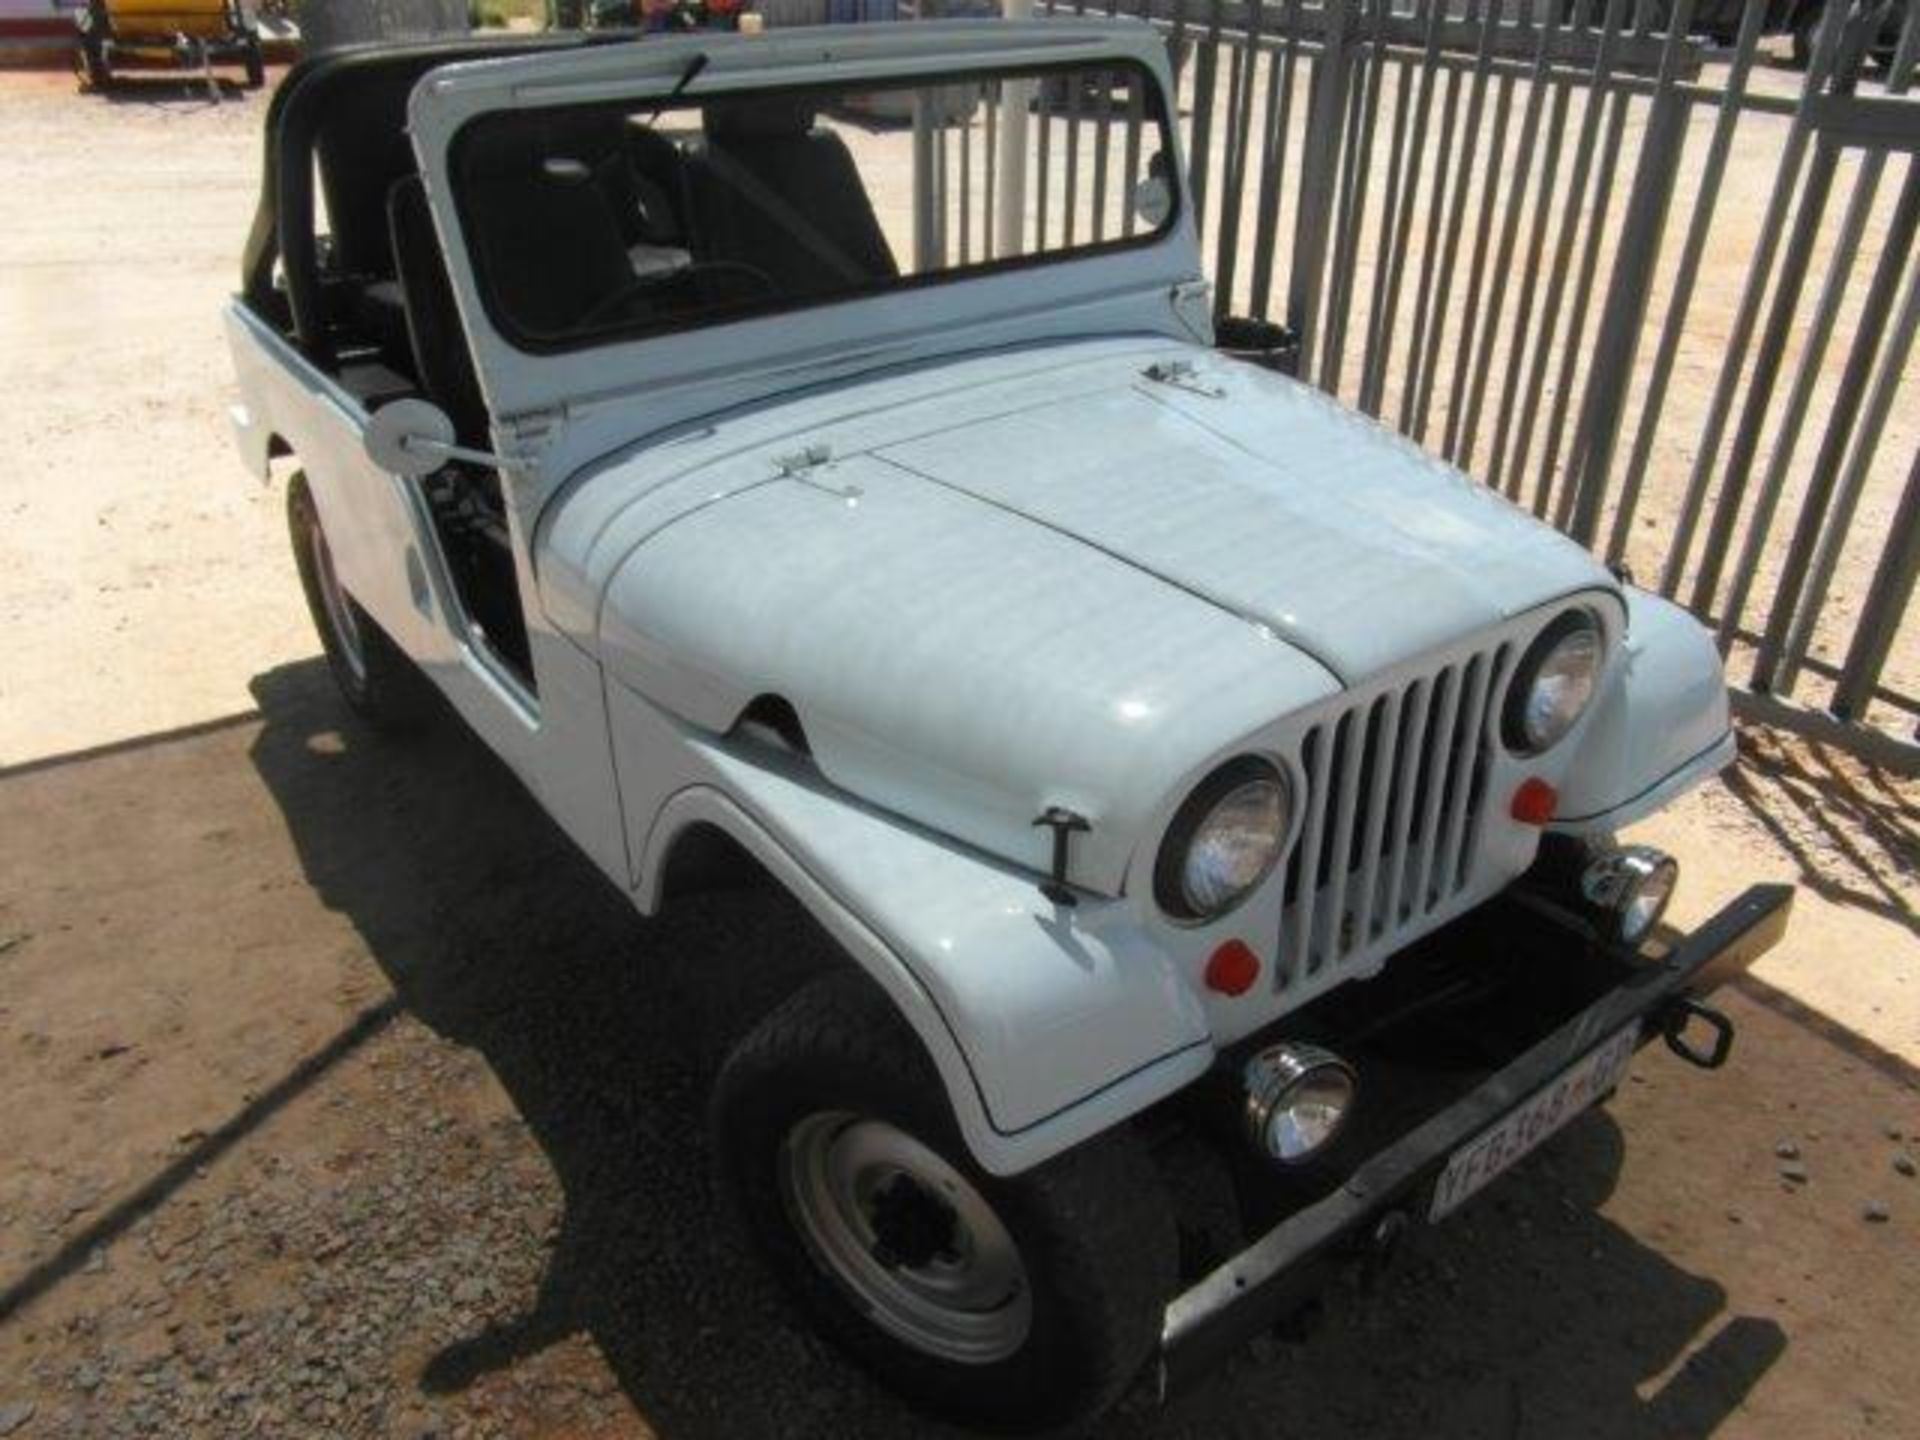 1986 YFB368GP Jeep Willys With Original Motor, Gearbox And Transfer Case (Built-Up) (Vin No: 5070898